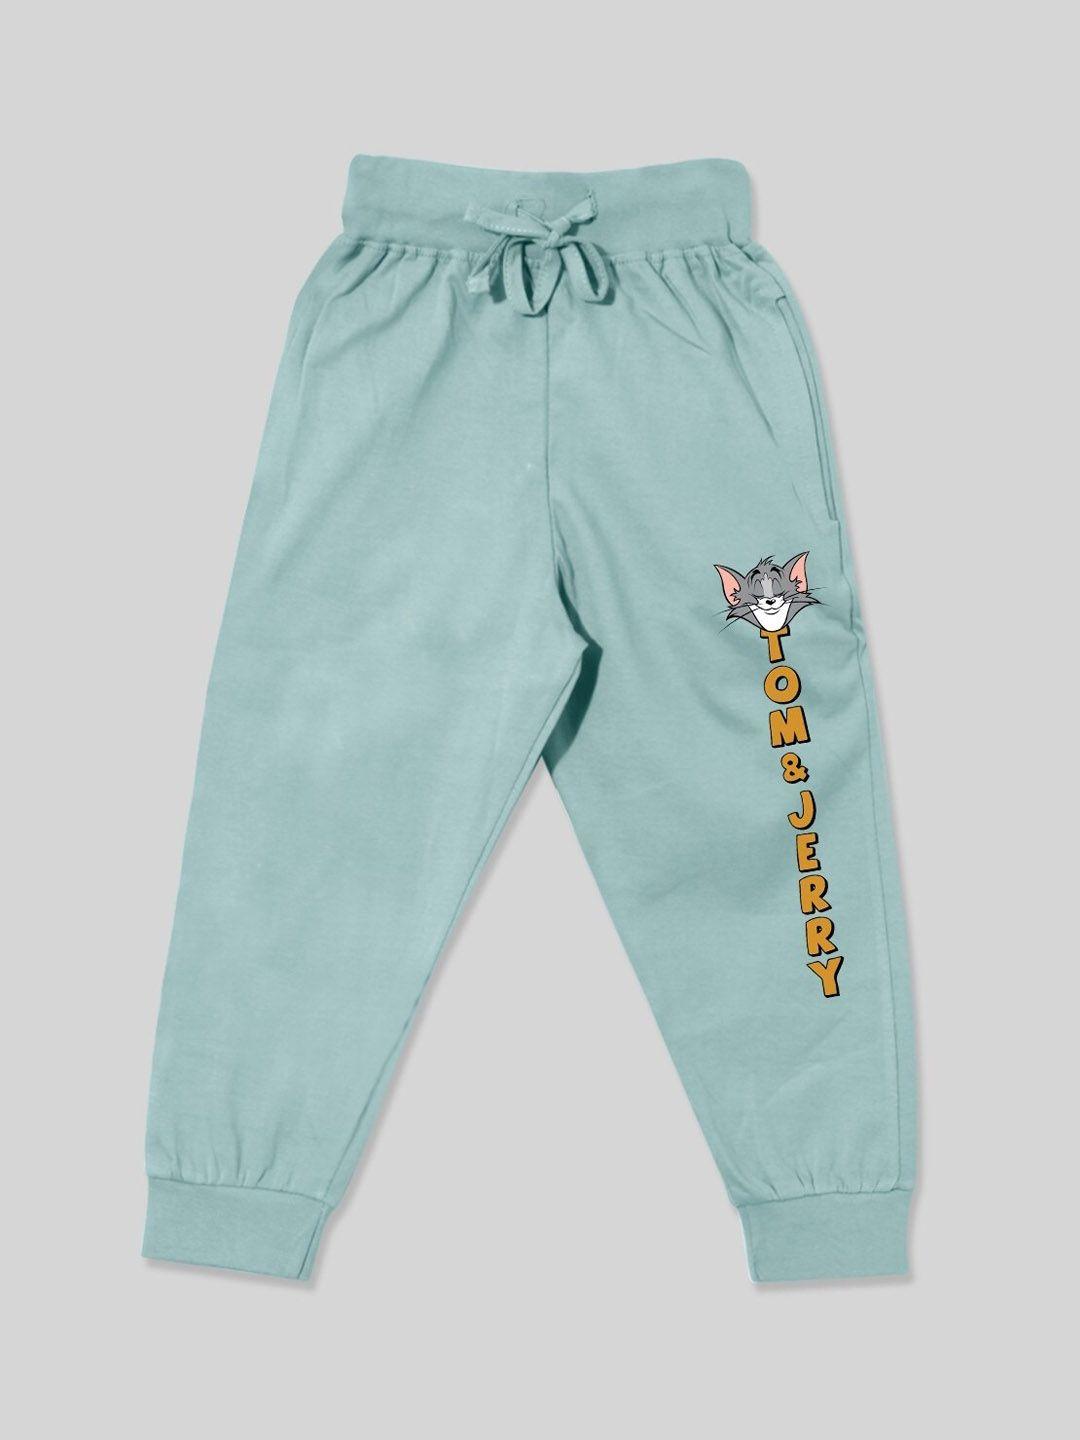 Minute Mirth Boys Tom & jerry Graphic Printed Cotton Joggers